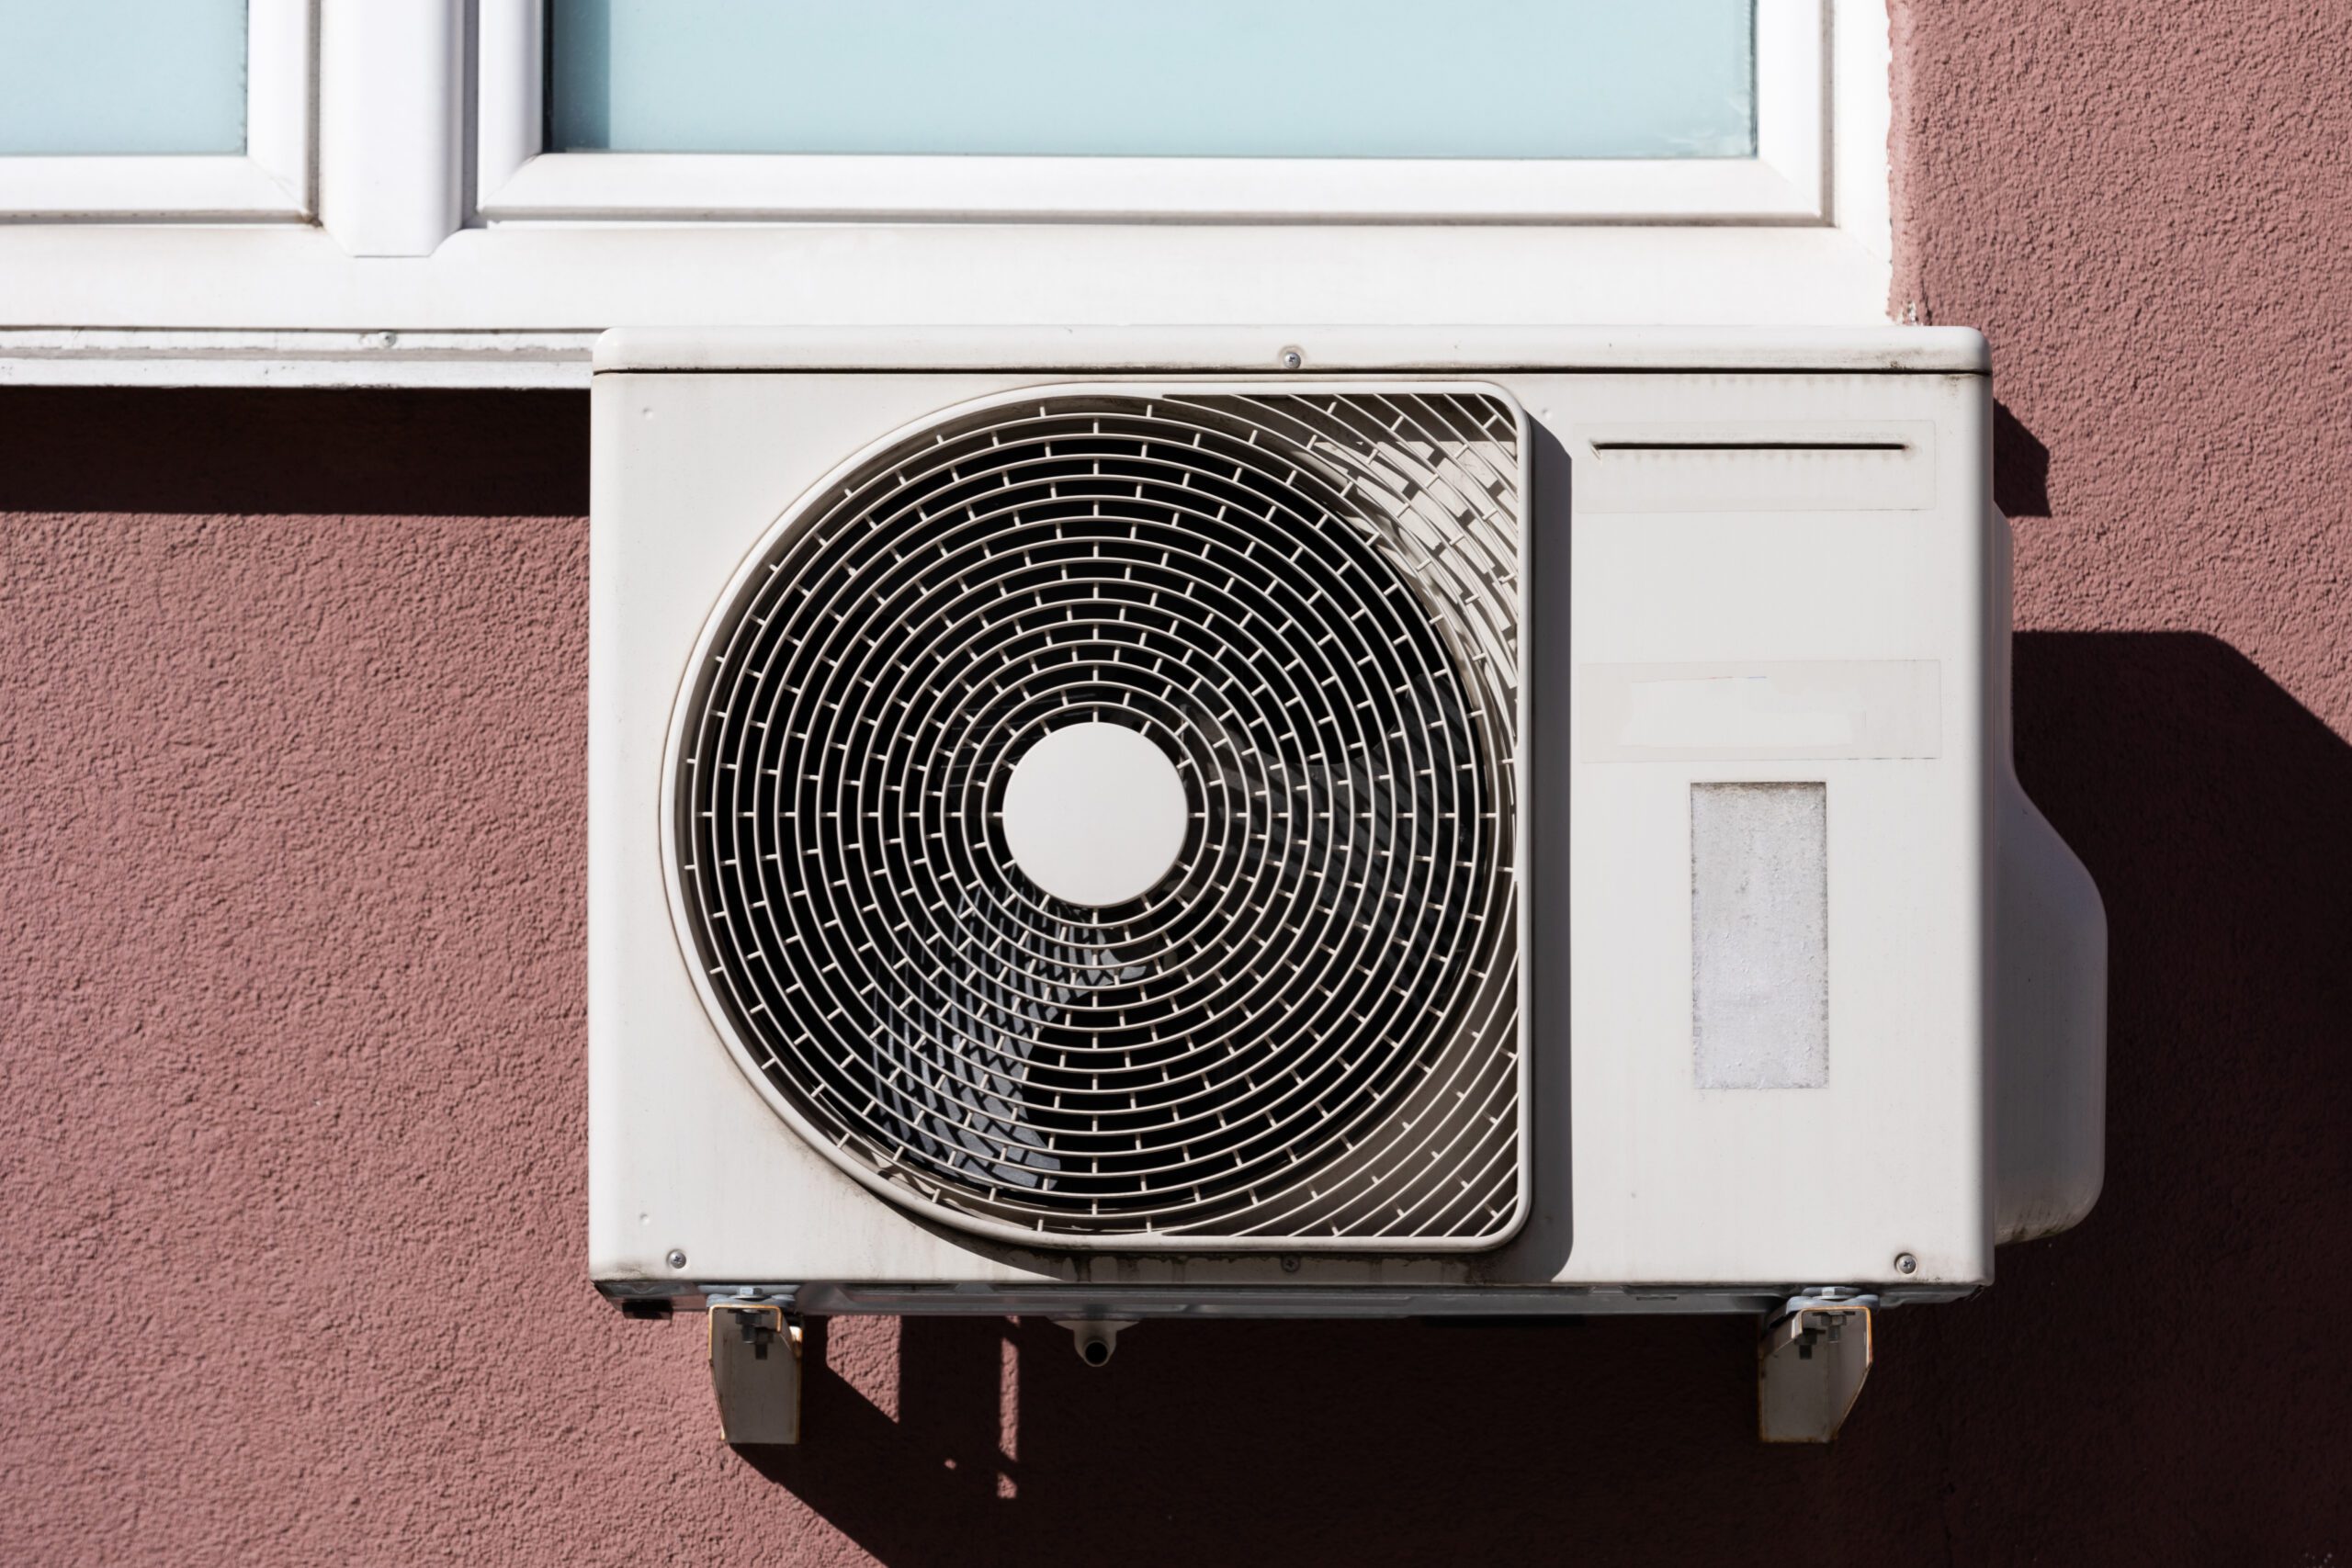 Is it bad for an air conditioner to run 24/7/365?